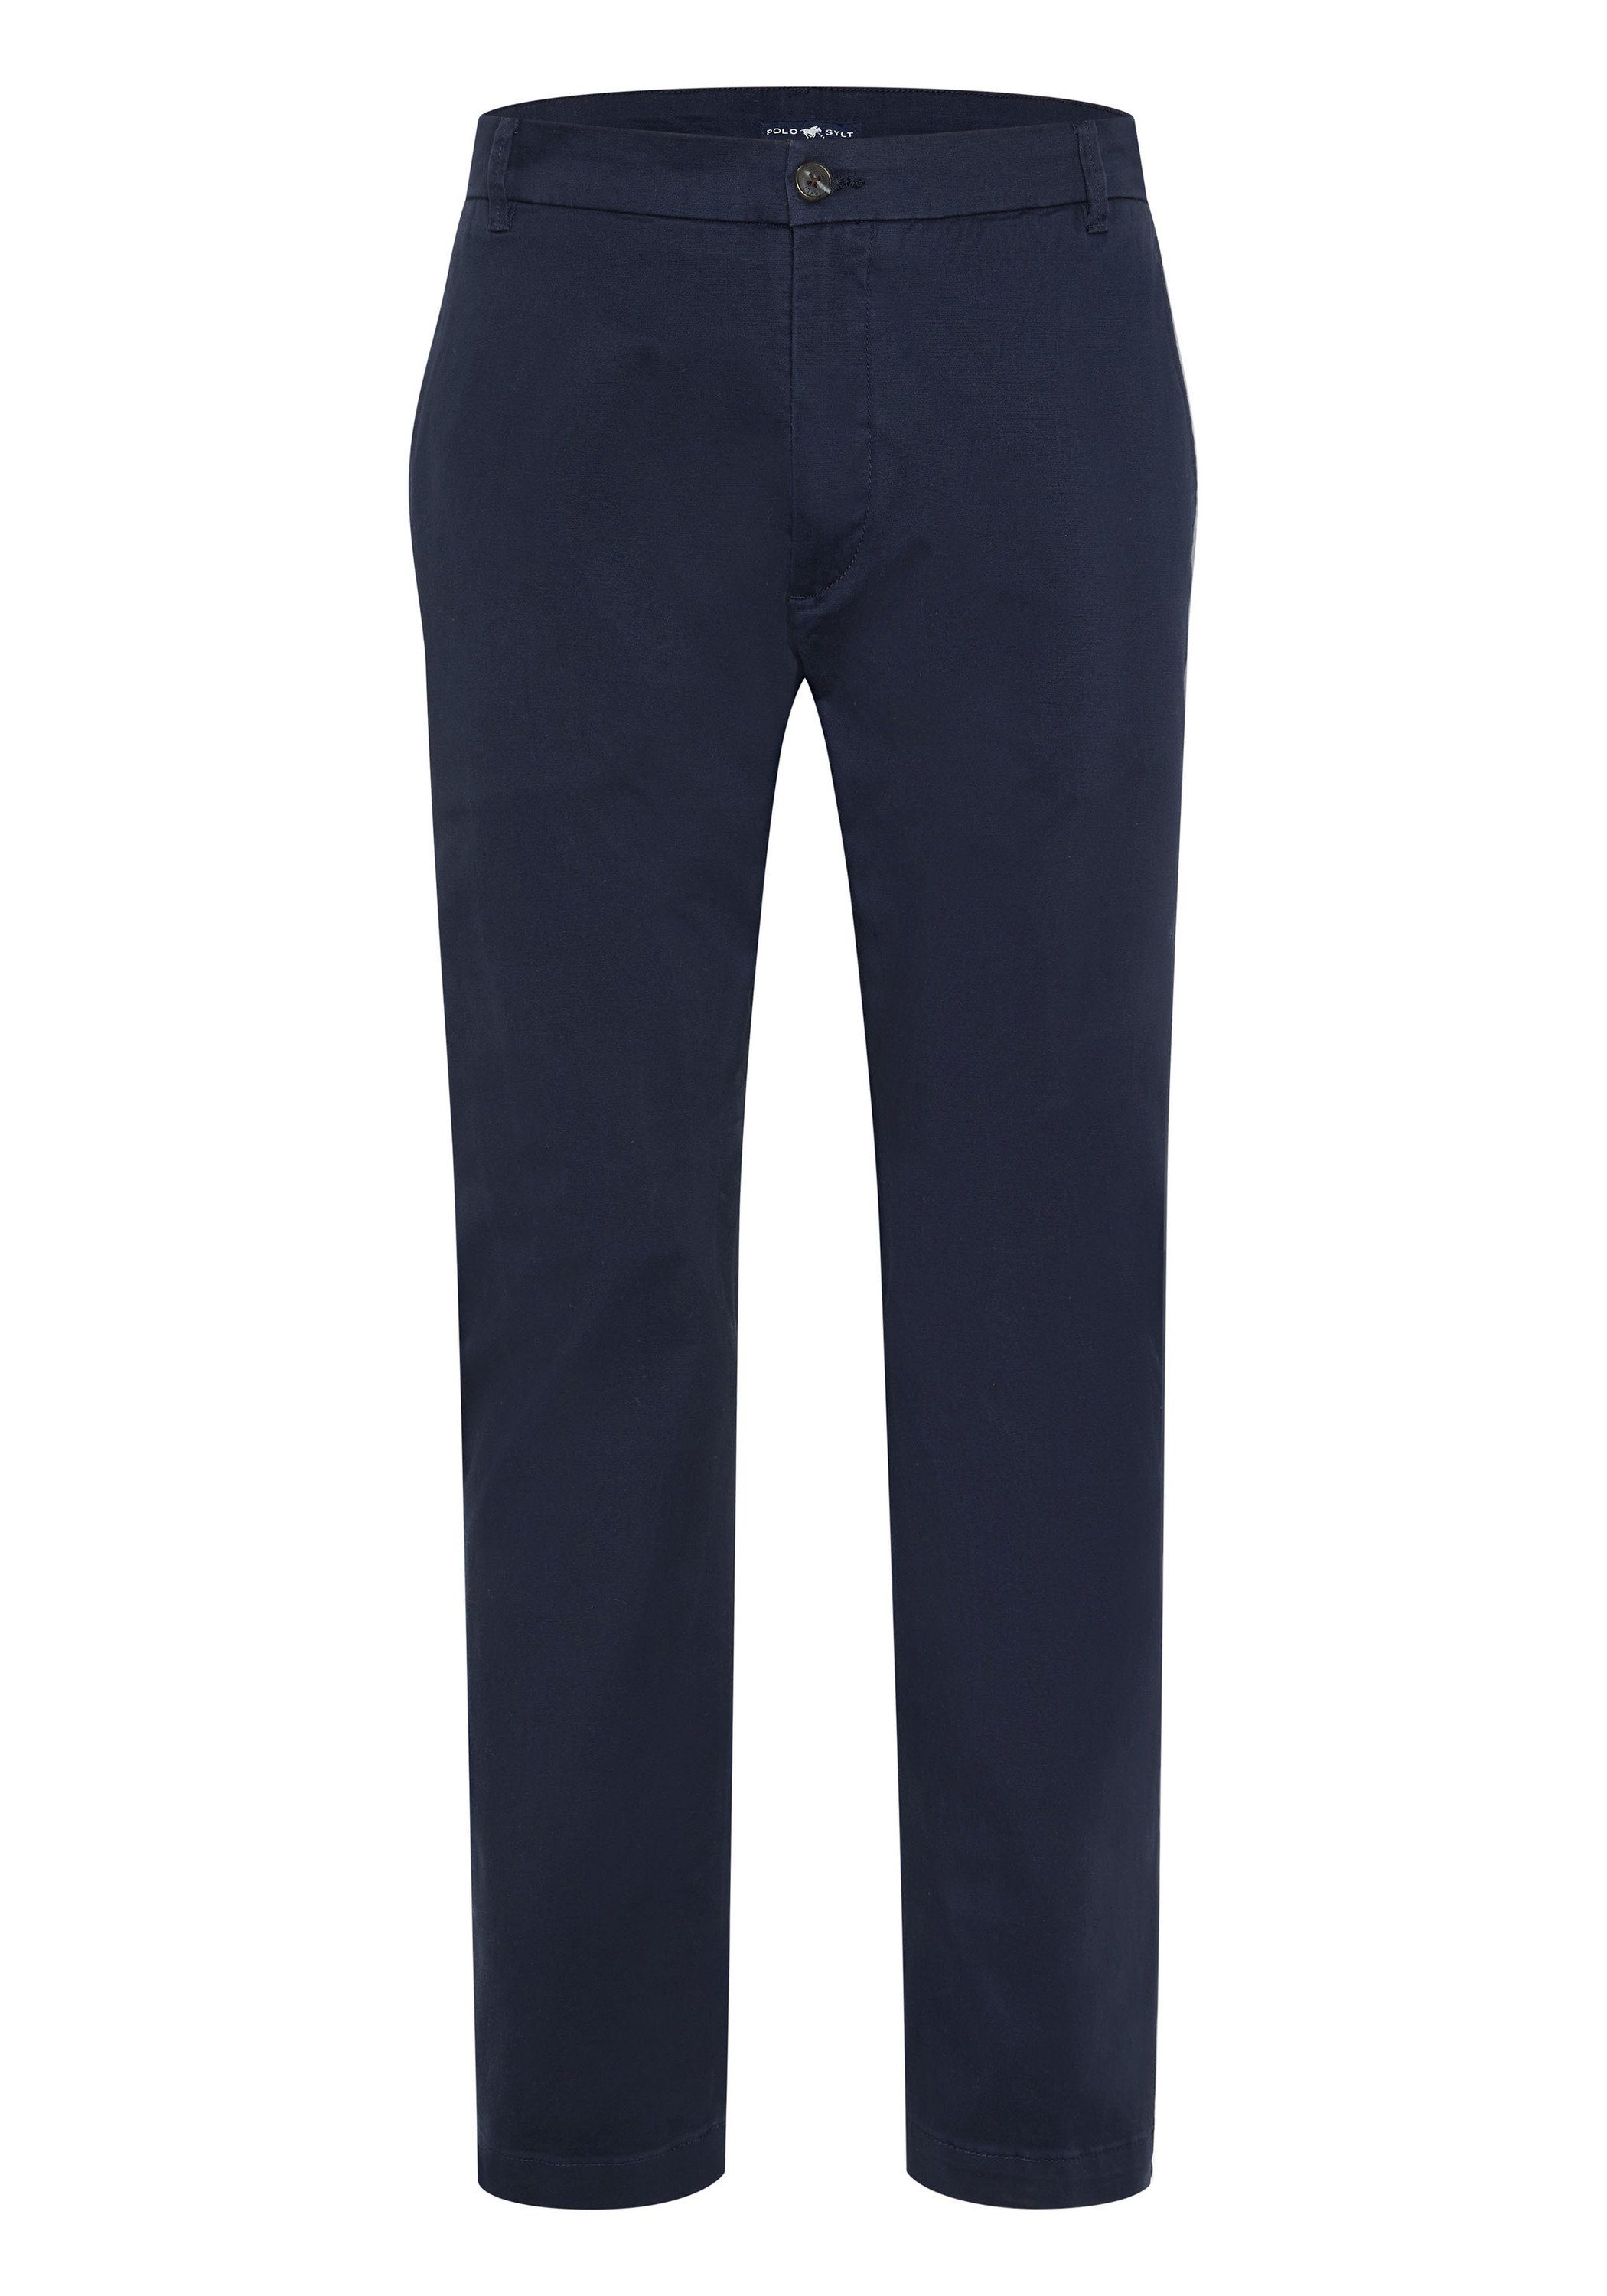 Polo Sylt Chinohose im cleanen Design 19-3924 Night Sky